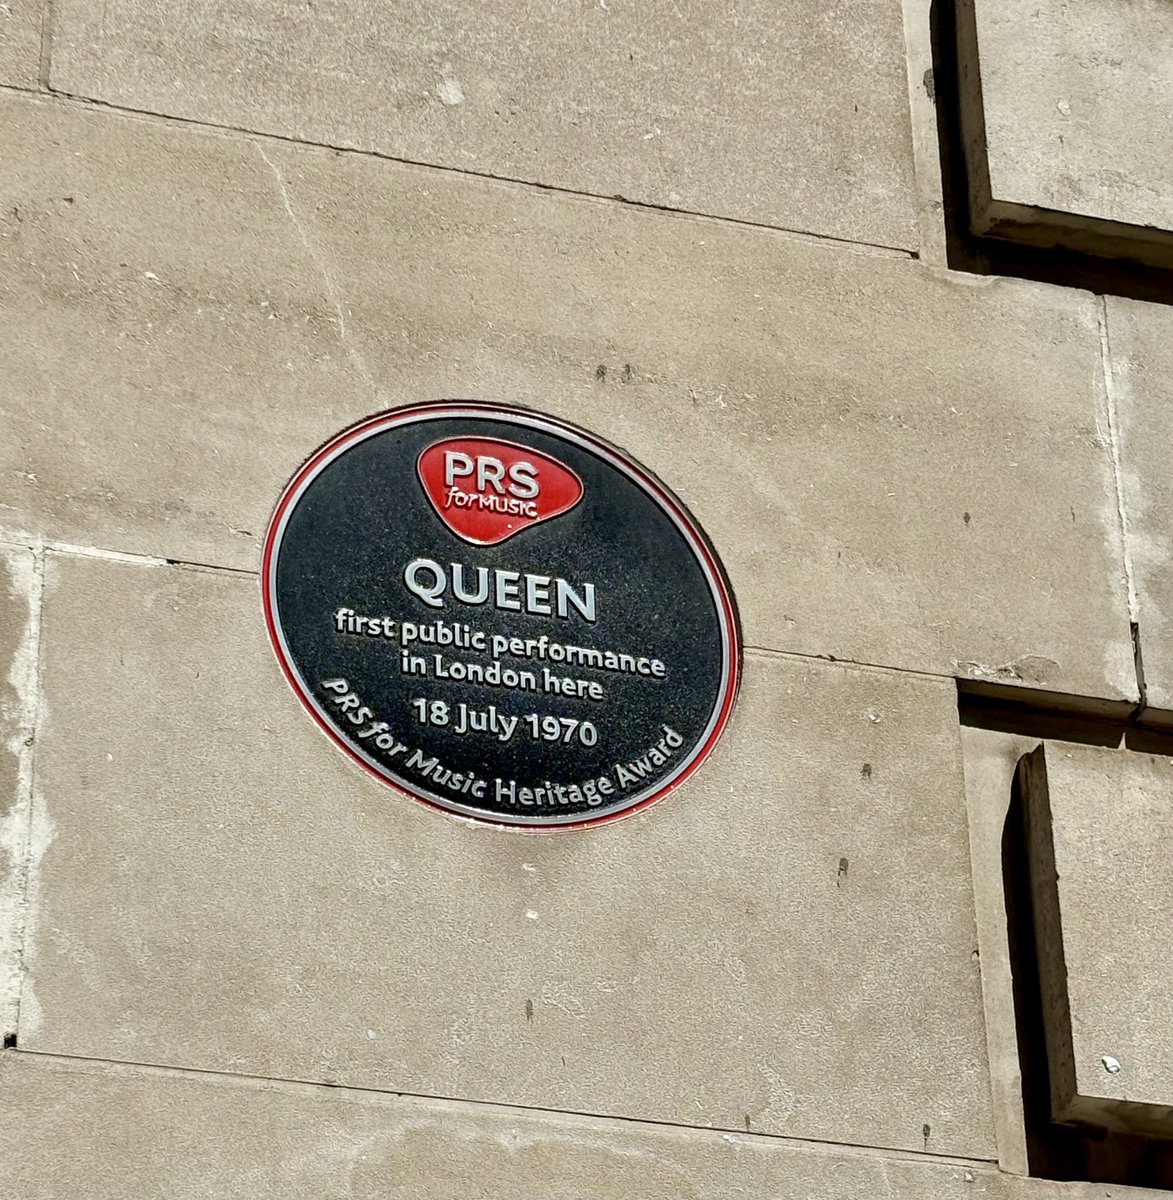 For Queen lovers, at Imperial College London.